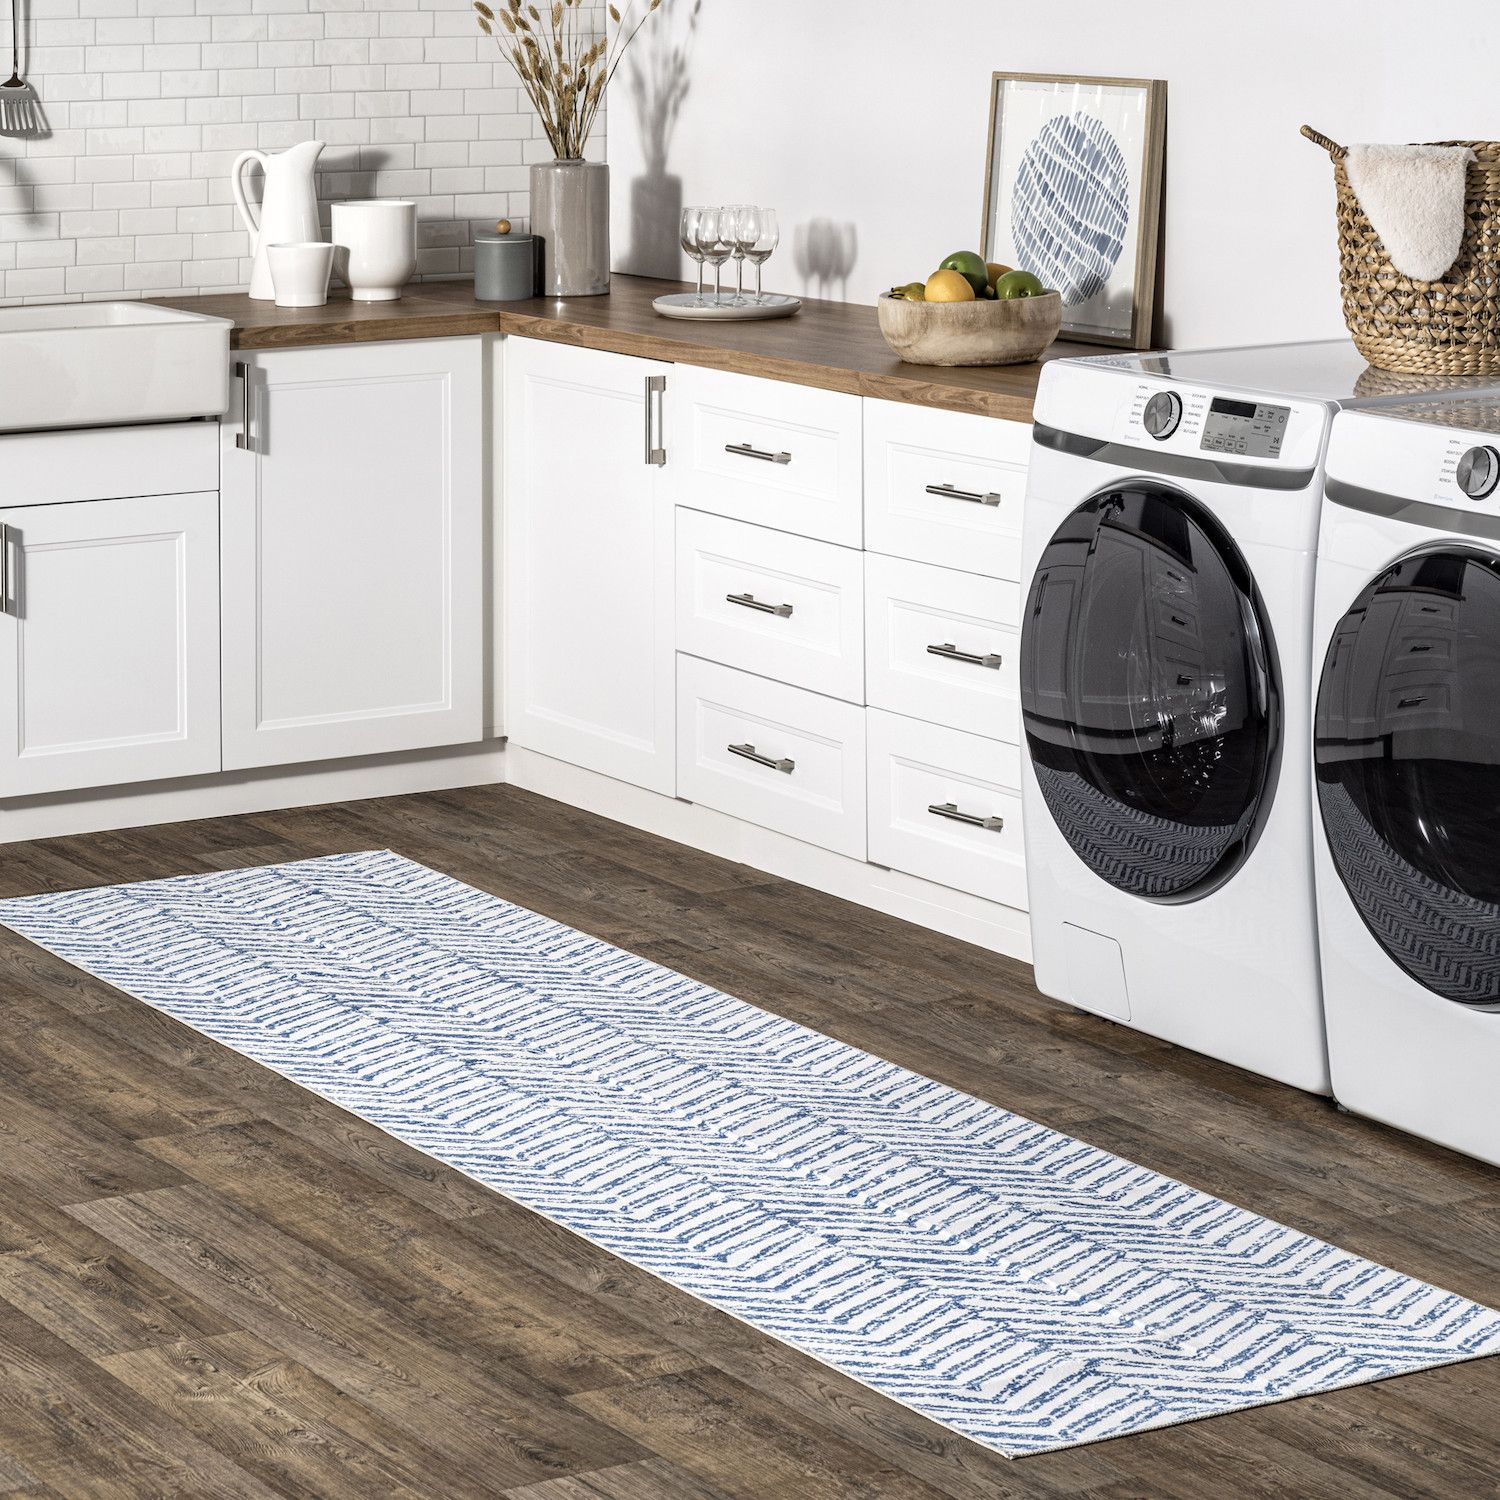 Area rugs offer style and a plush surface that enhances the look of your laundry room.